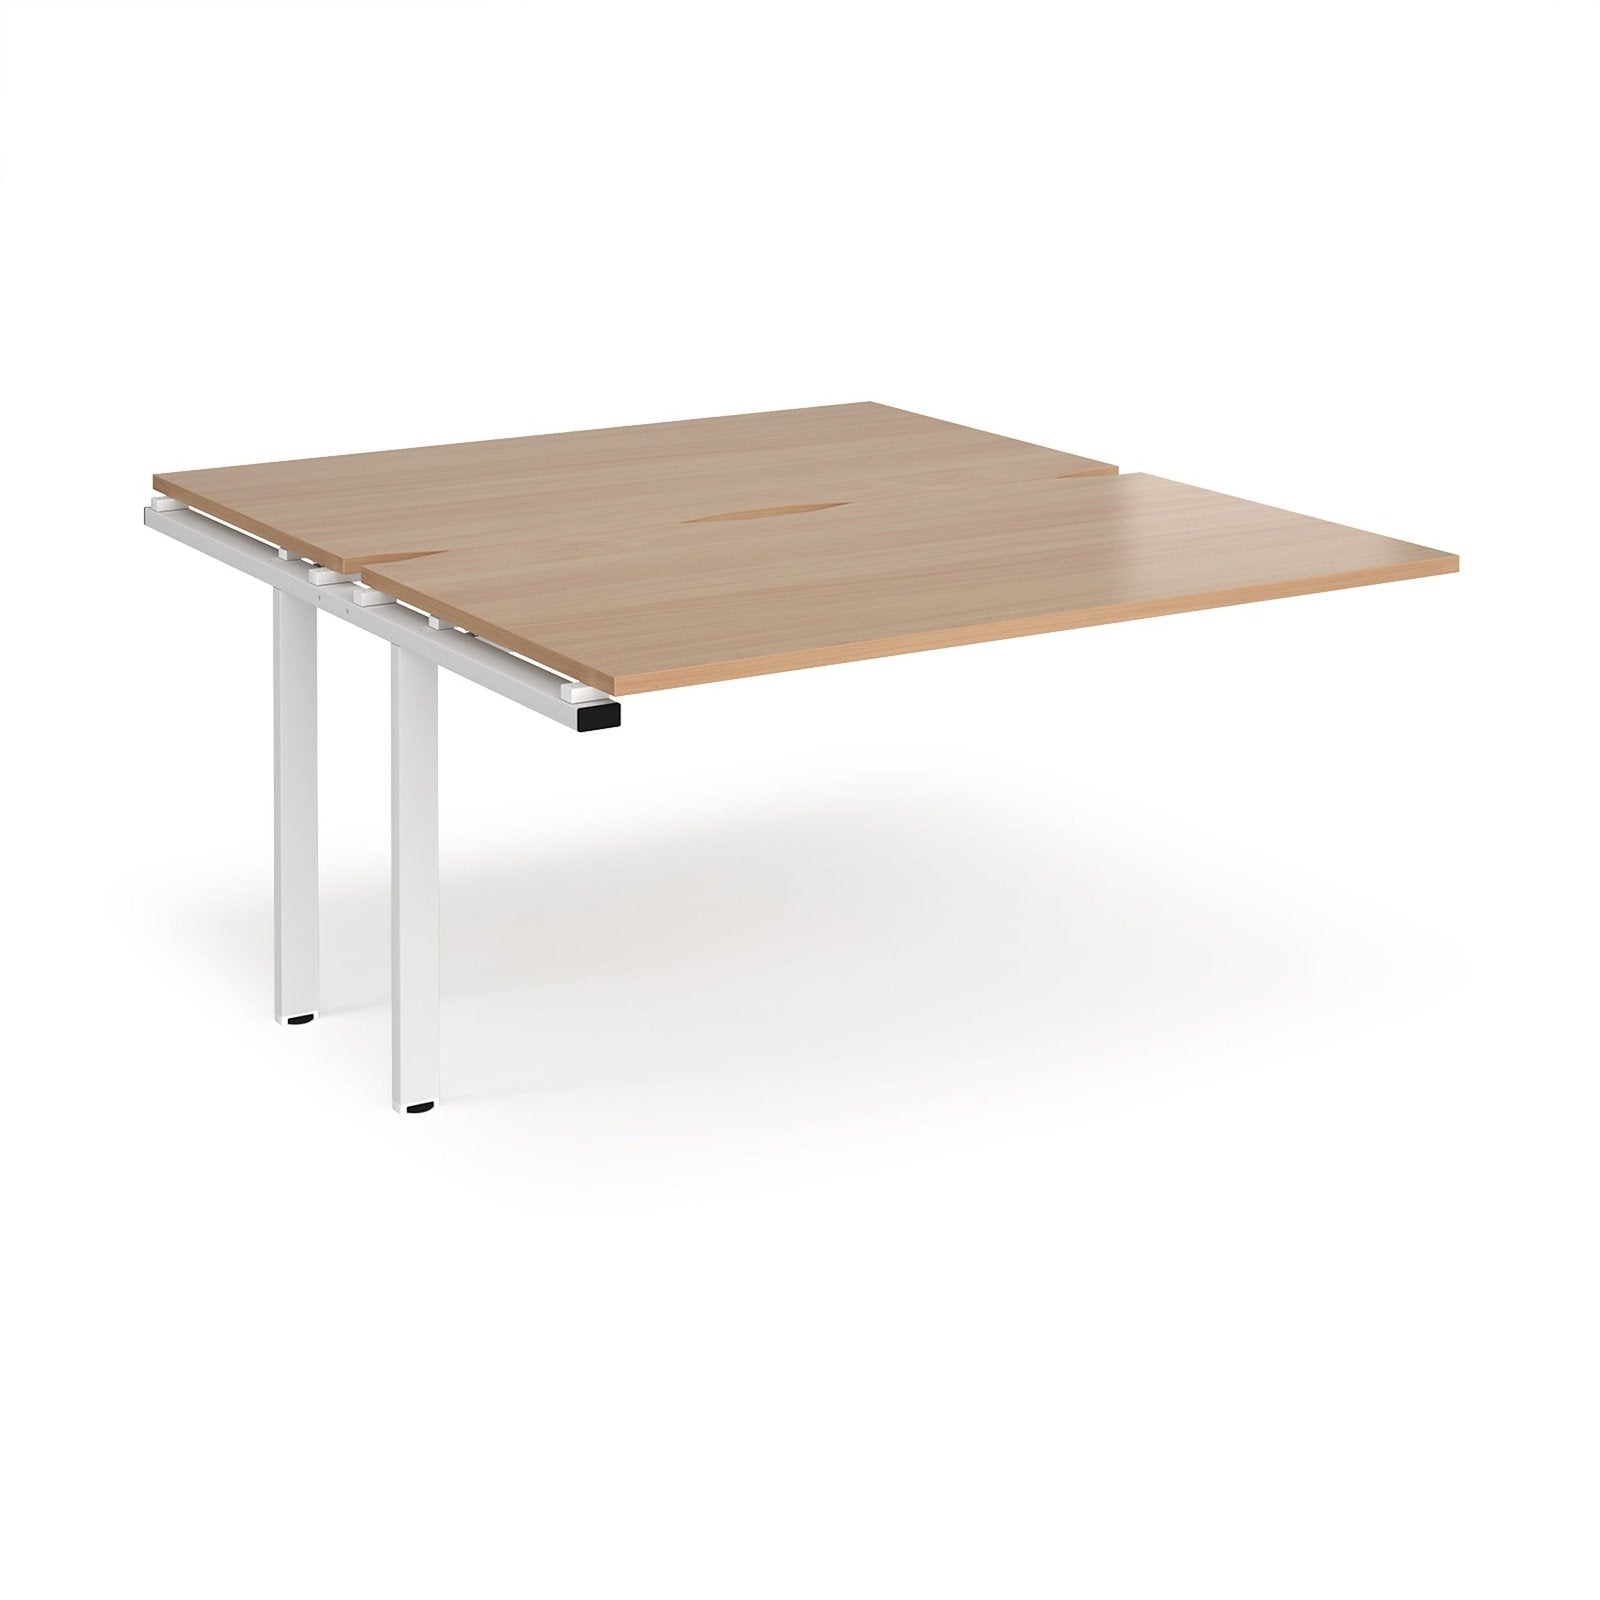 Adapt sliding top add on units 1600 deep - Office Products Online